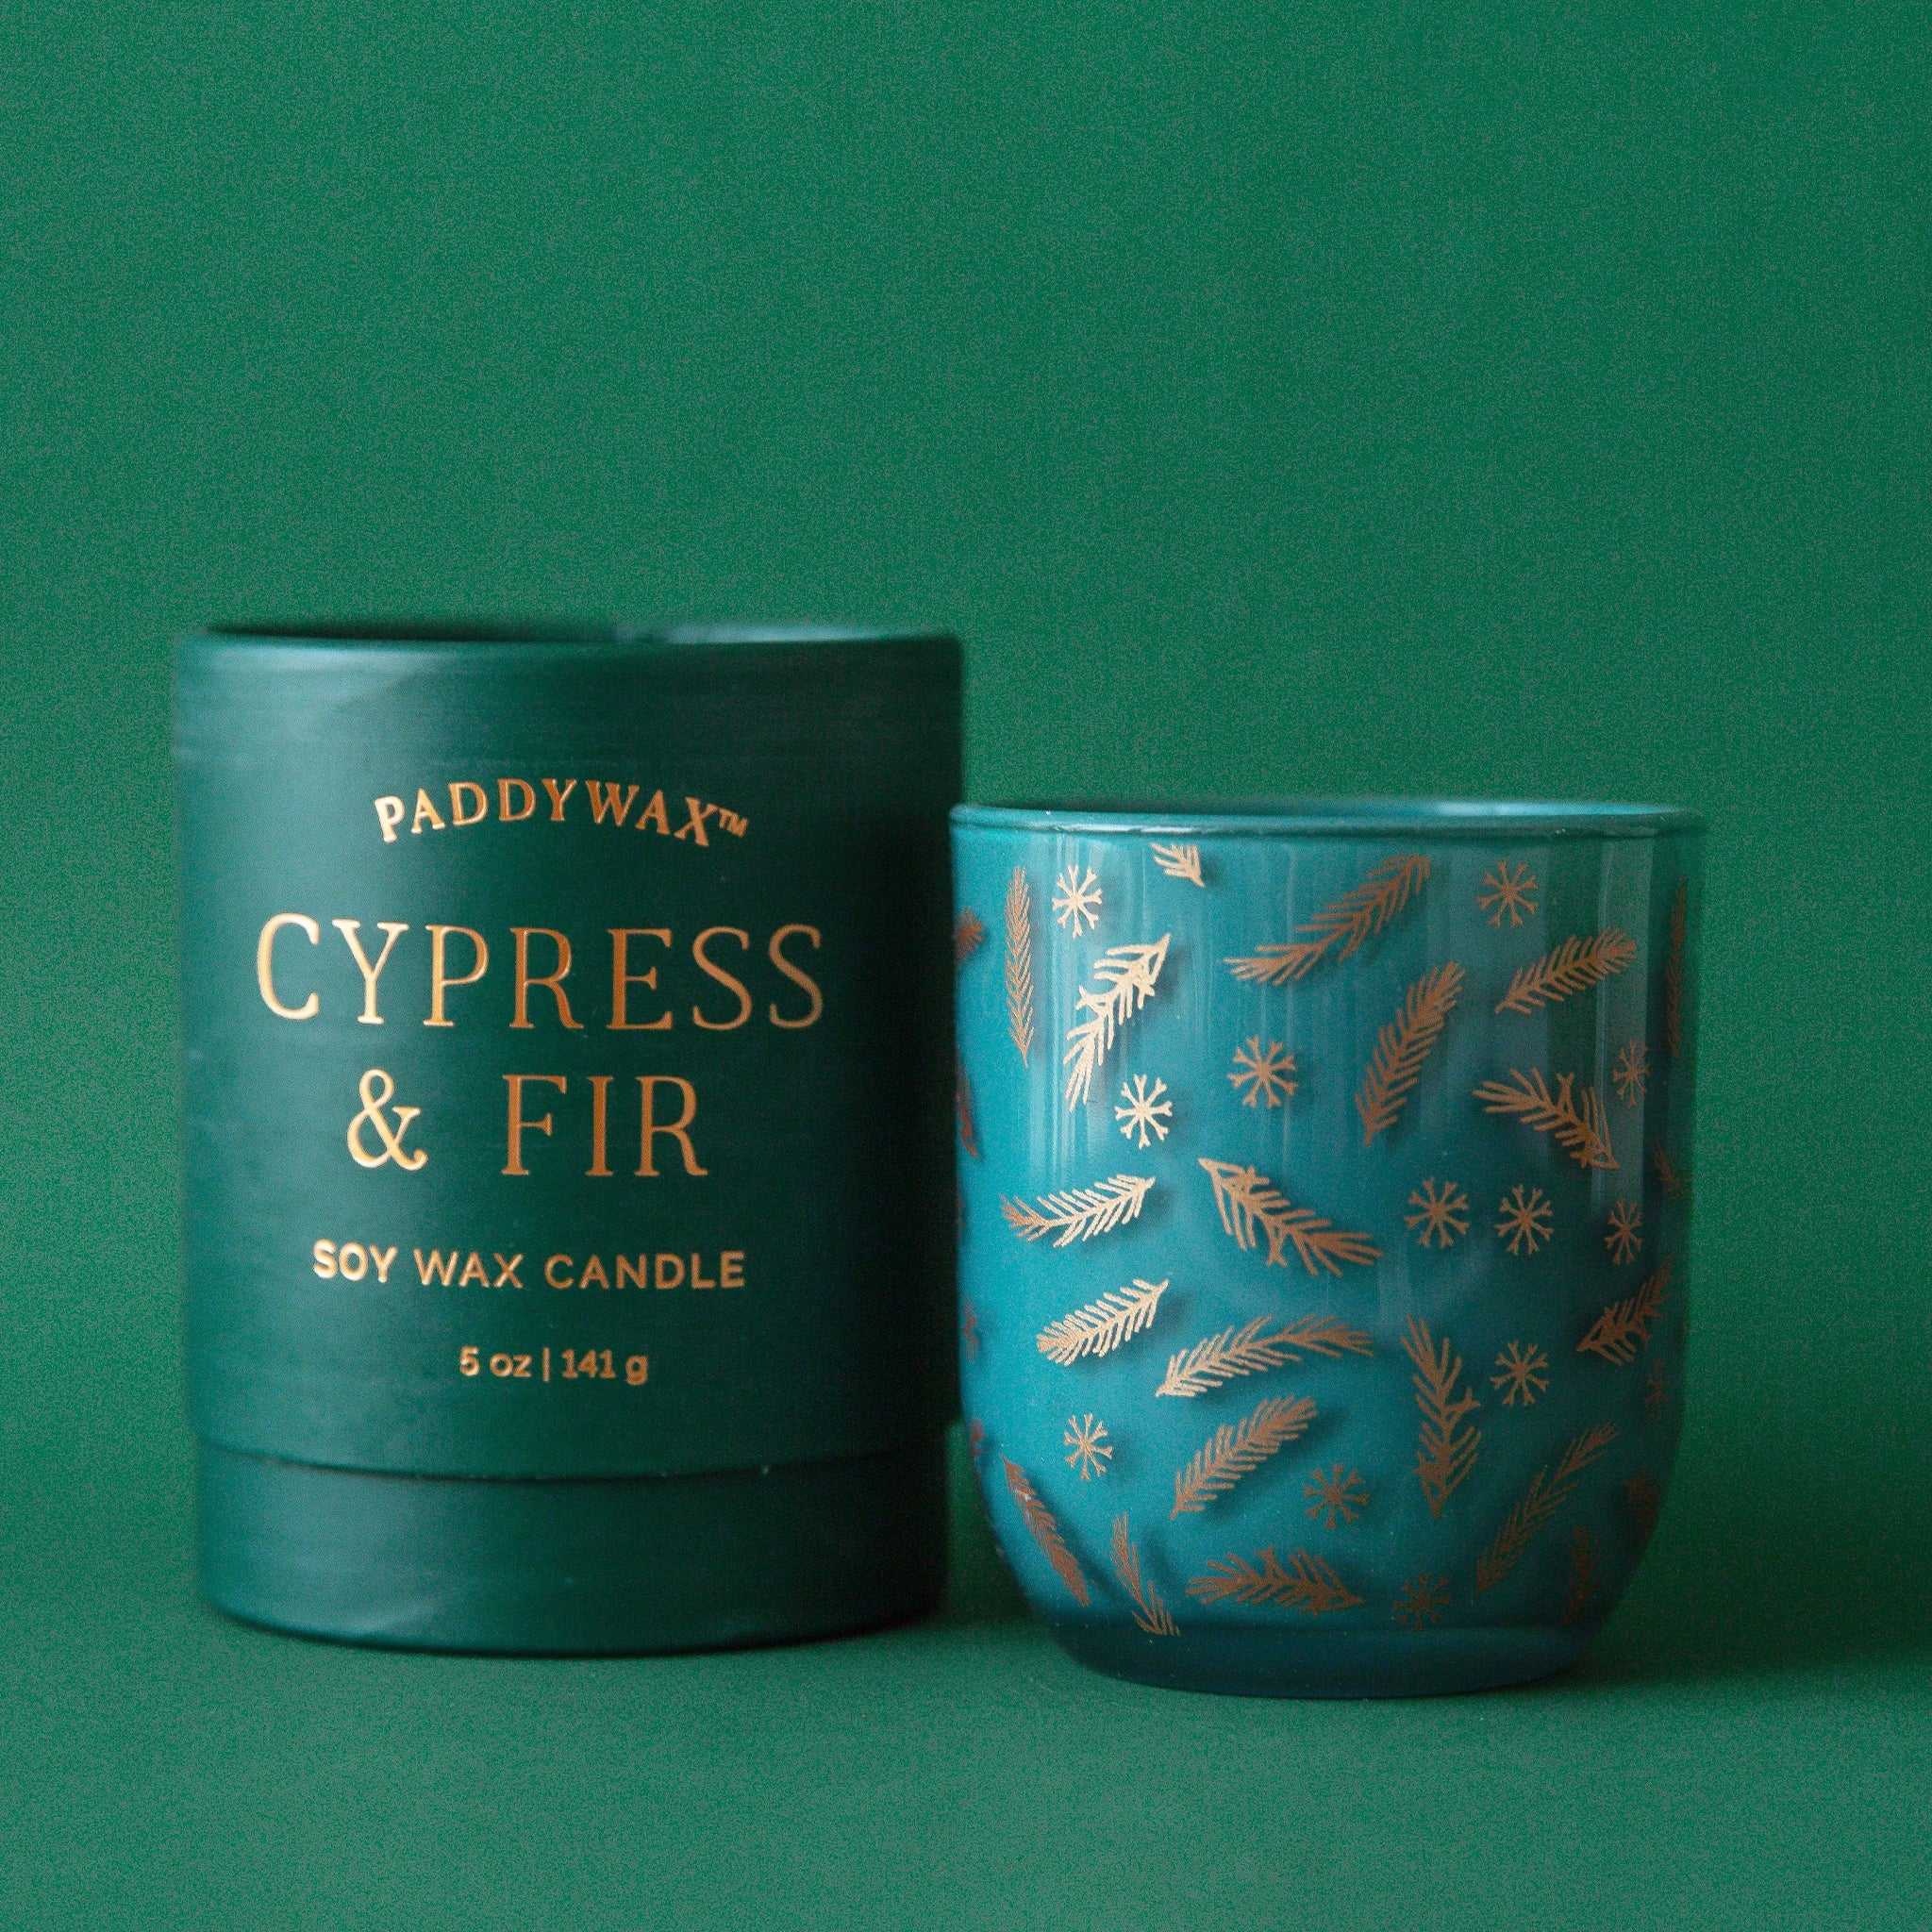 On a dark green background is a glass candle jar in a dark green shade with gold pine and snowflake designs alongside a cardboard tube container with gold foiled text that reads, &quot;Paddywax Cypress &amp; Fir Soy Wax Candle&quot;.